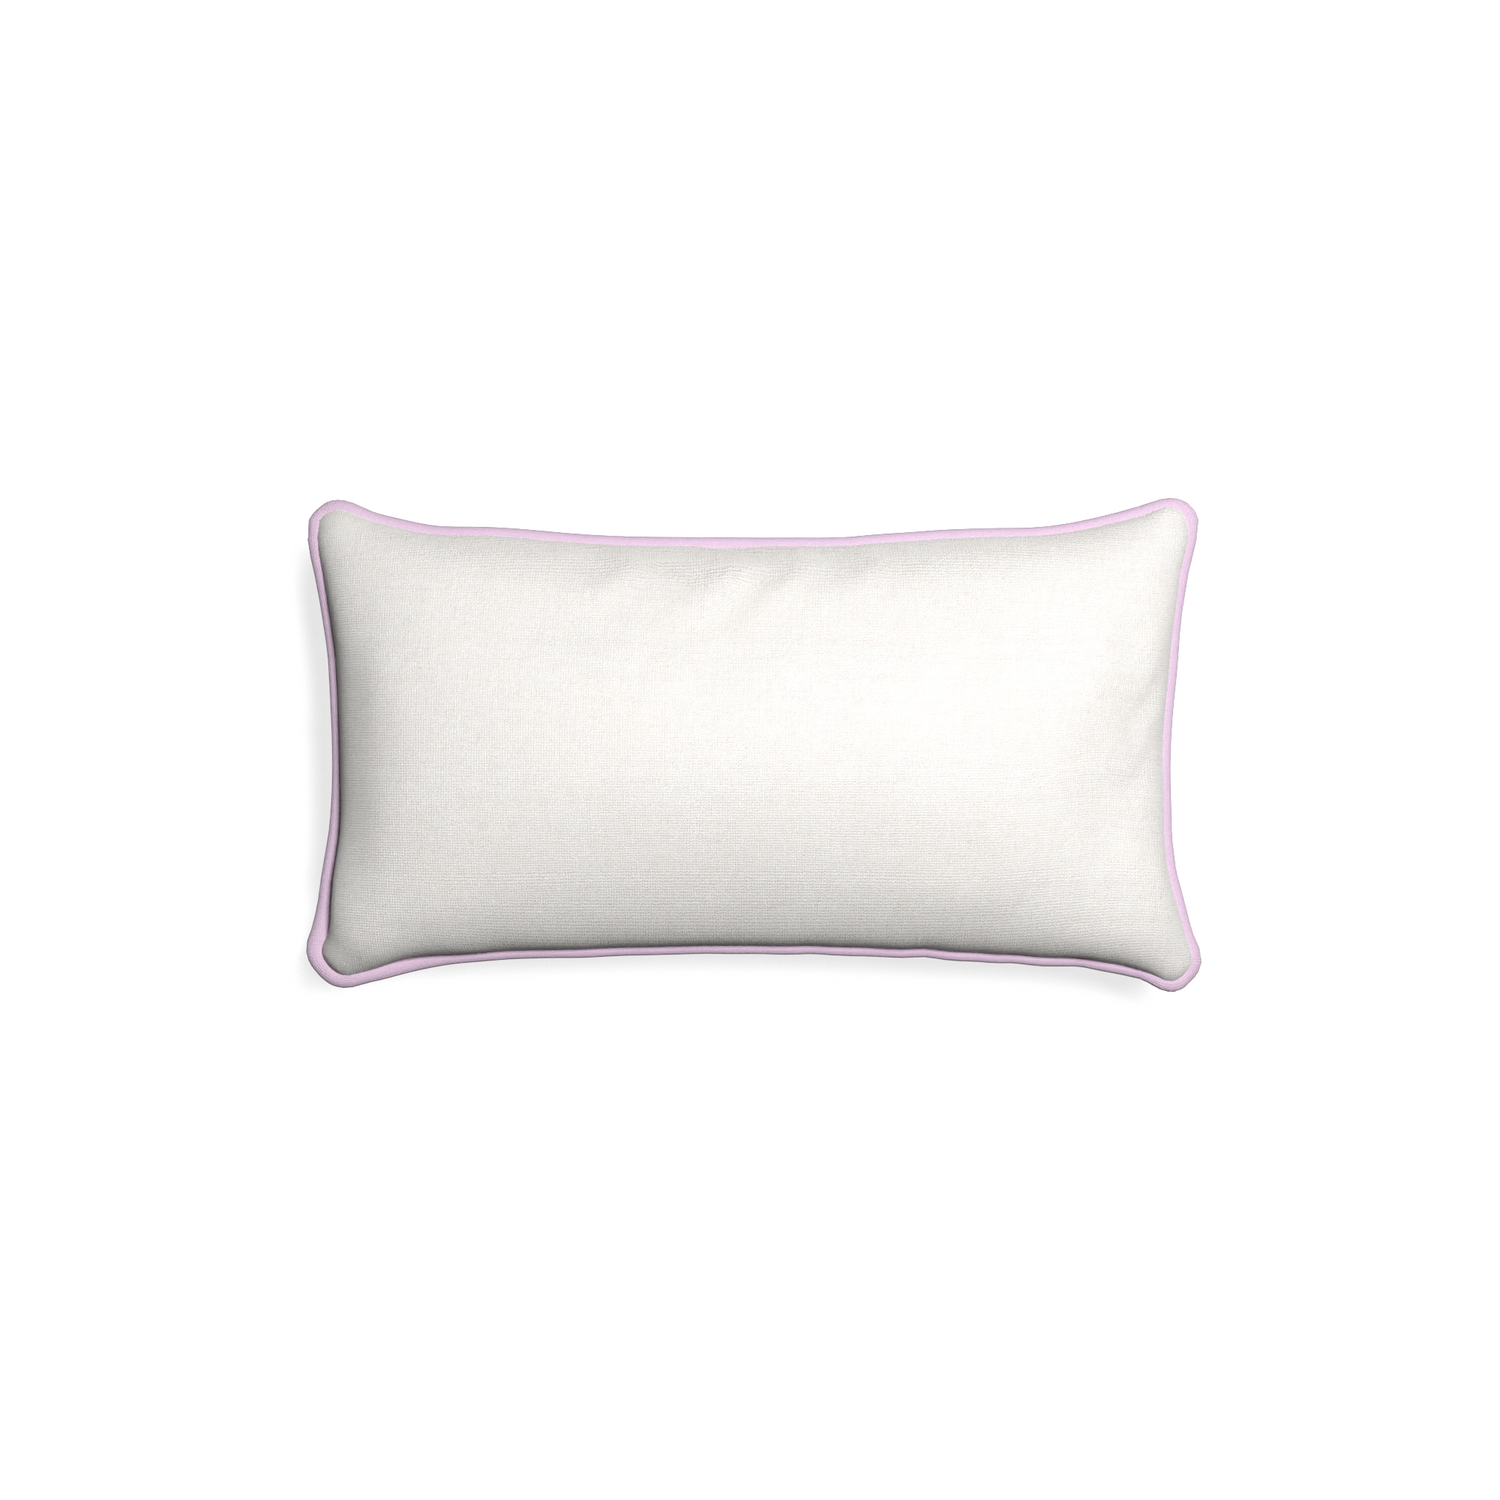 Petite-lumbar flour custom natural whitepillow with l piping on white background